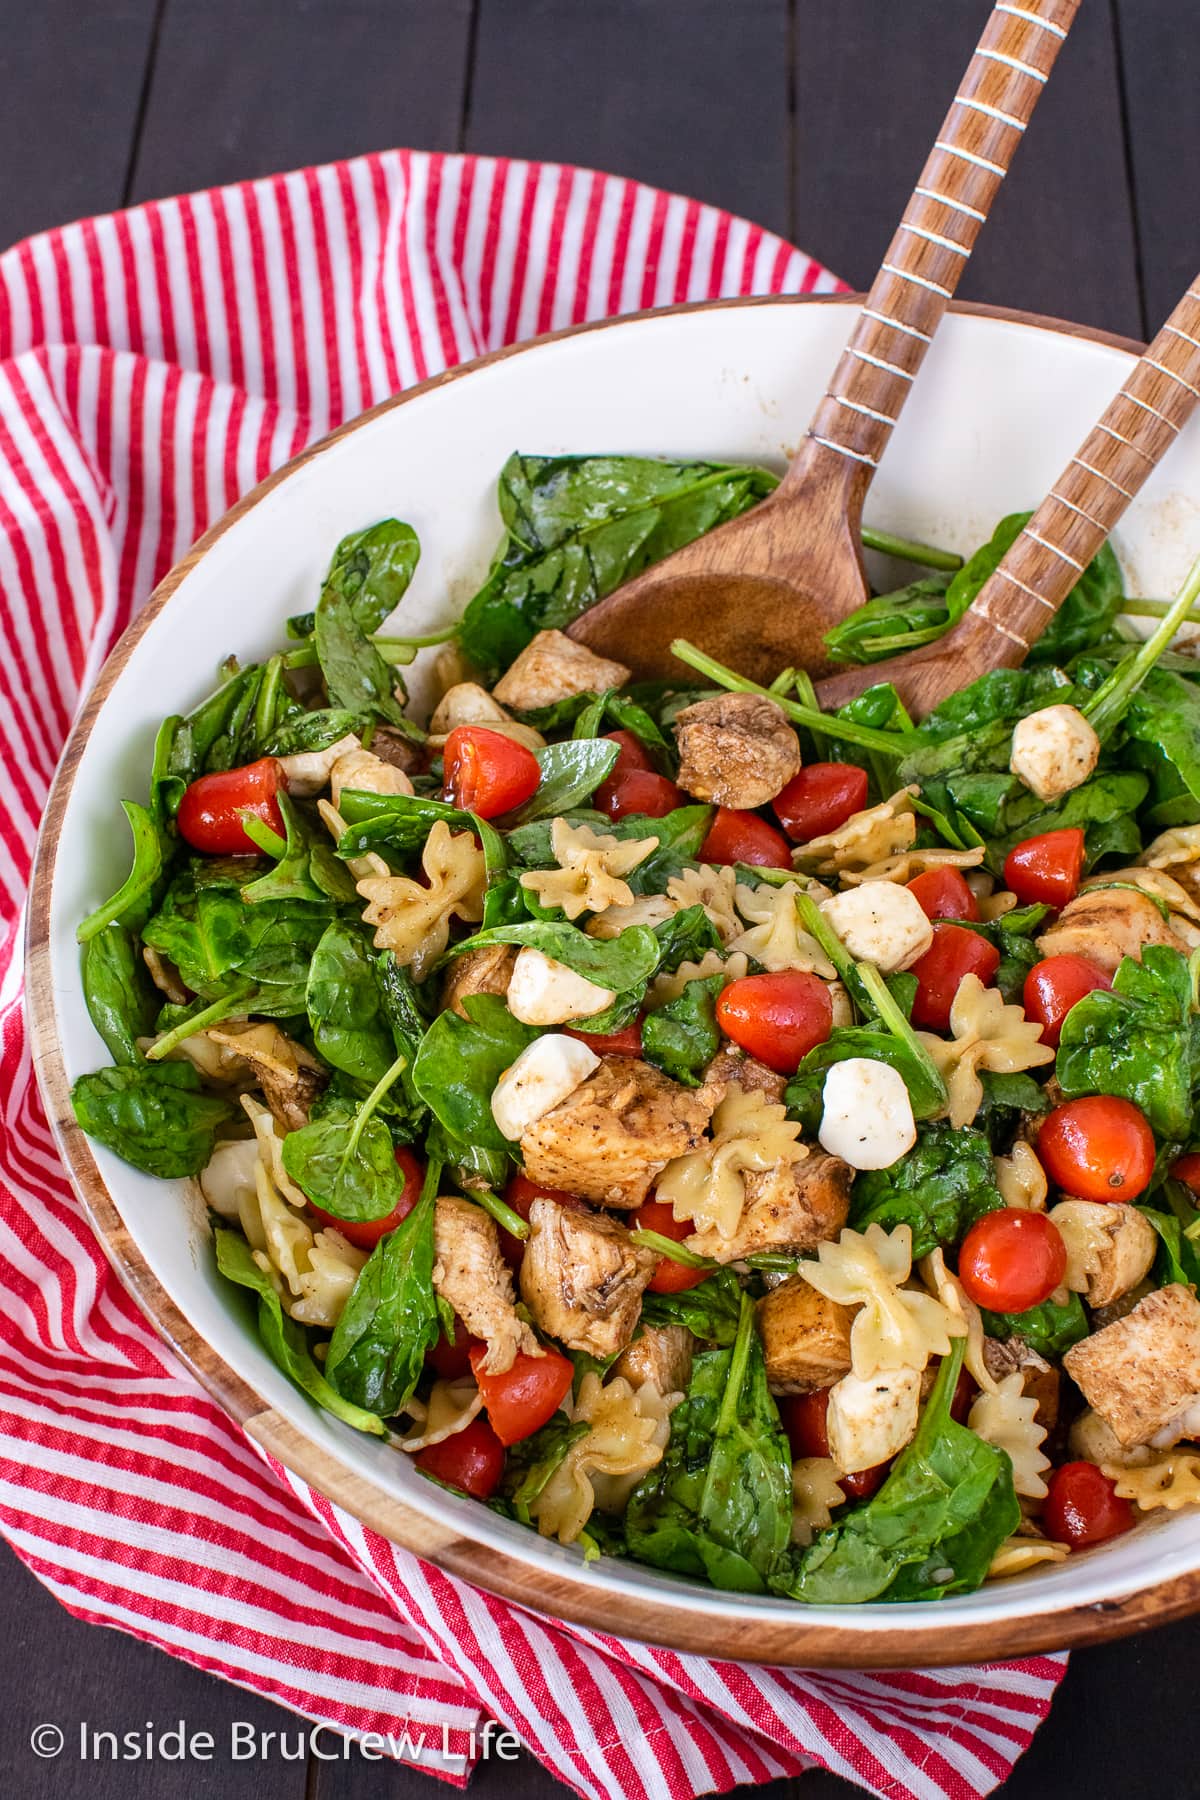 A bowl of spinach salad with chicken, tomatoes, and cheese.